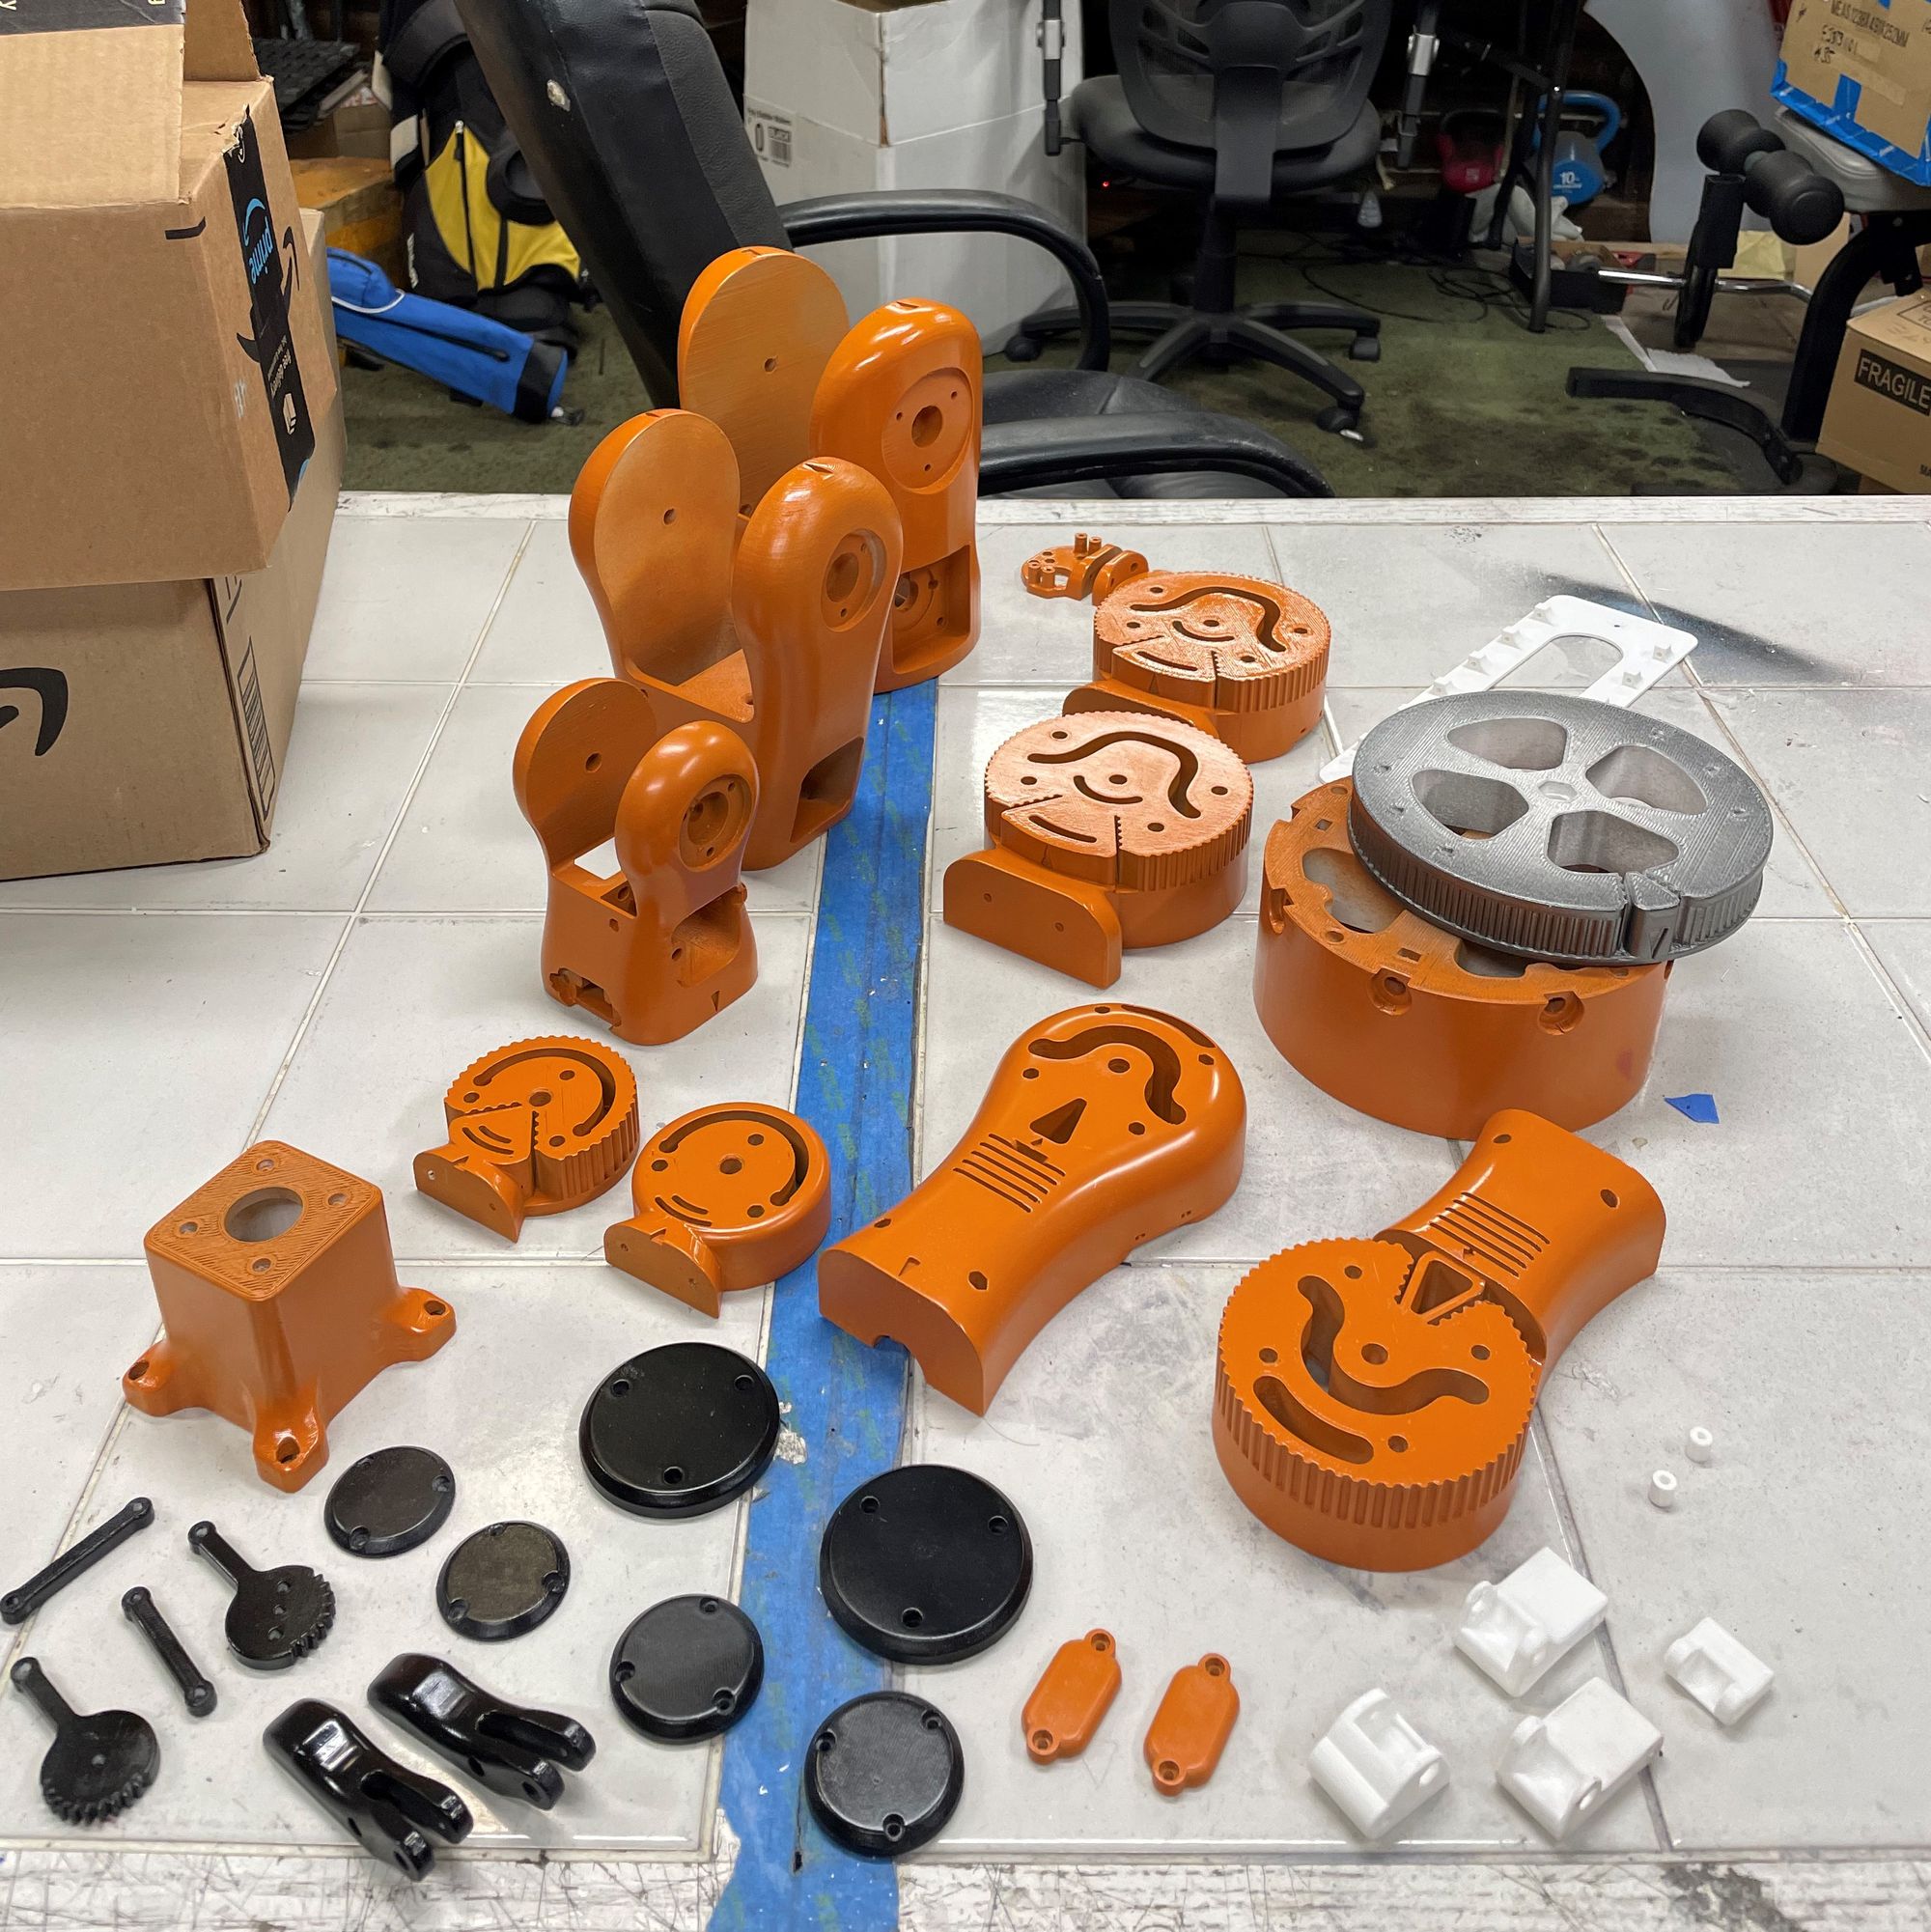 Post-processed 3D printed parts ready for assembly